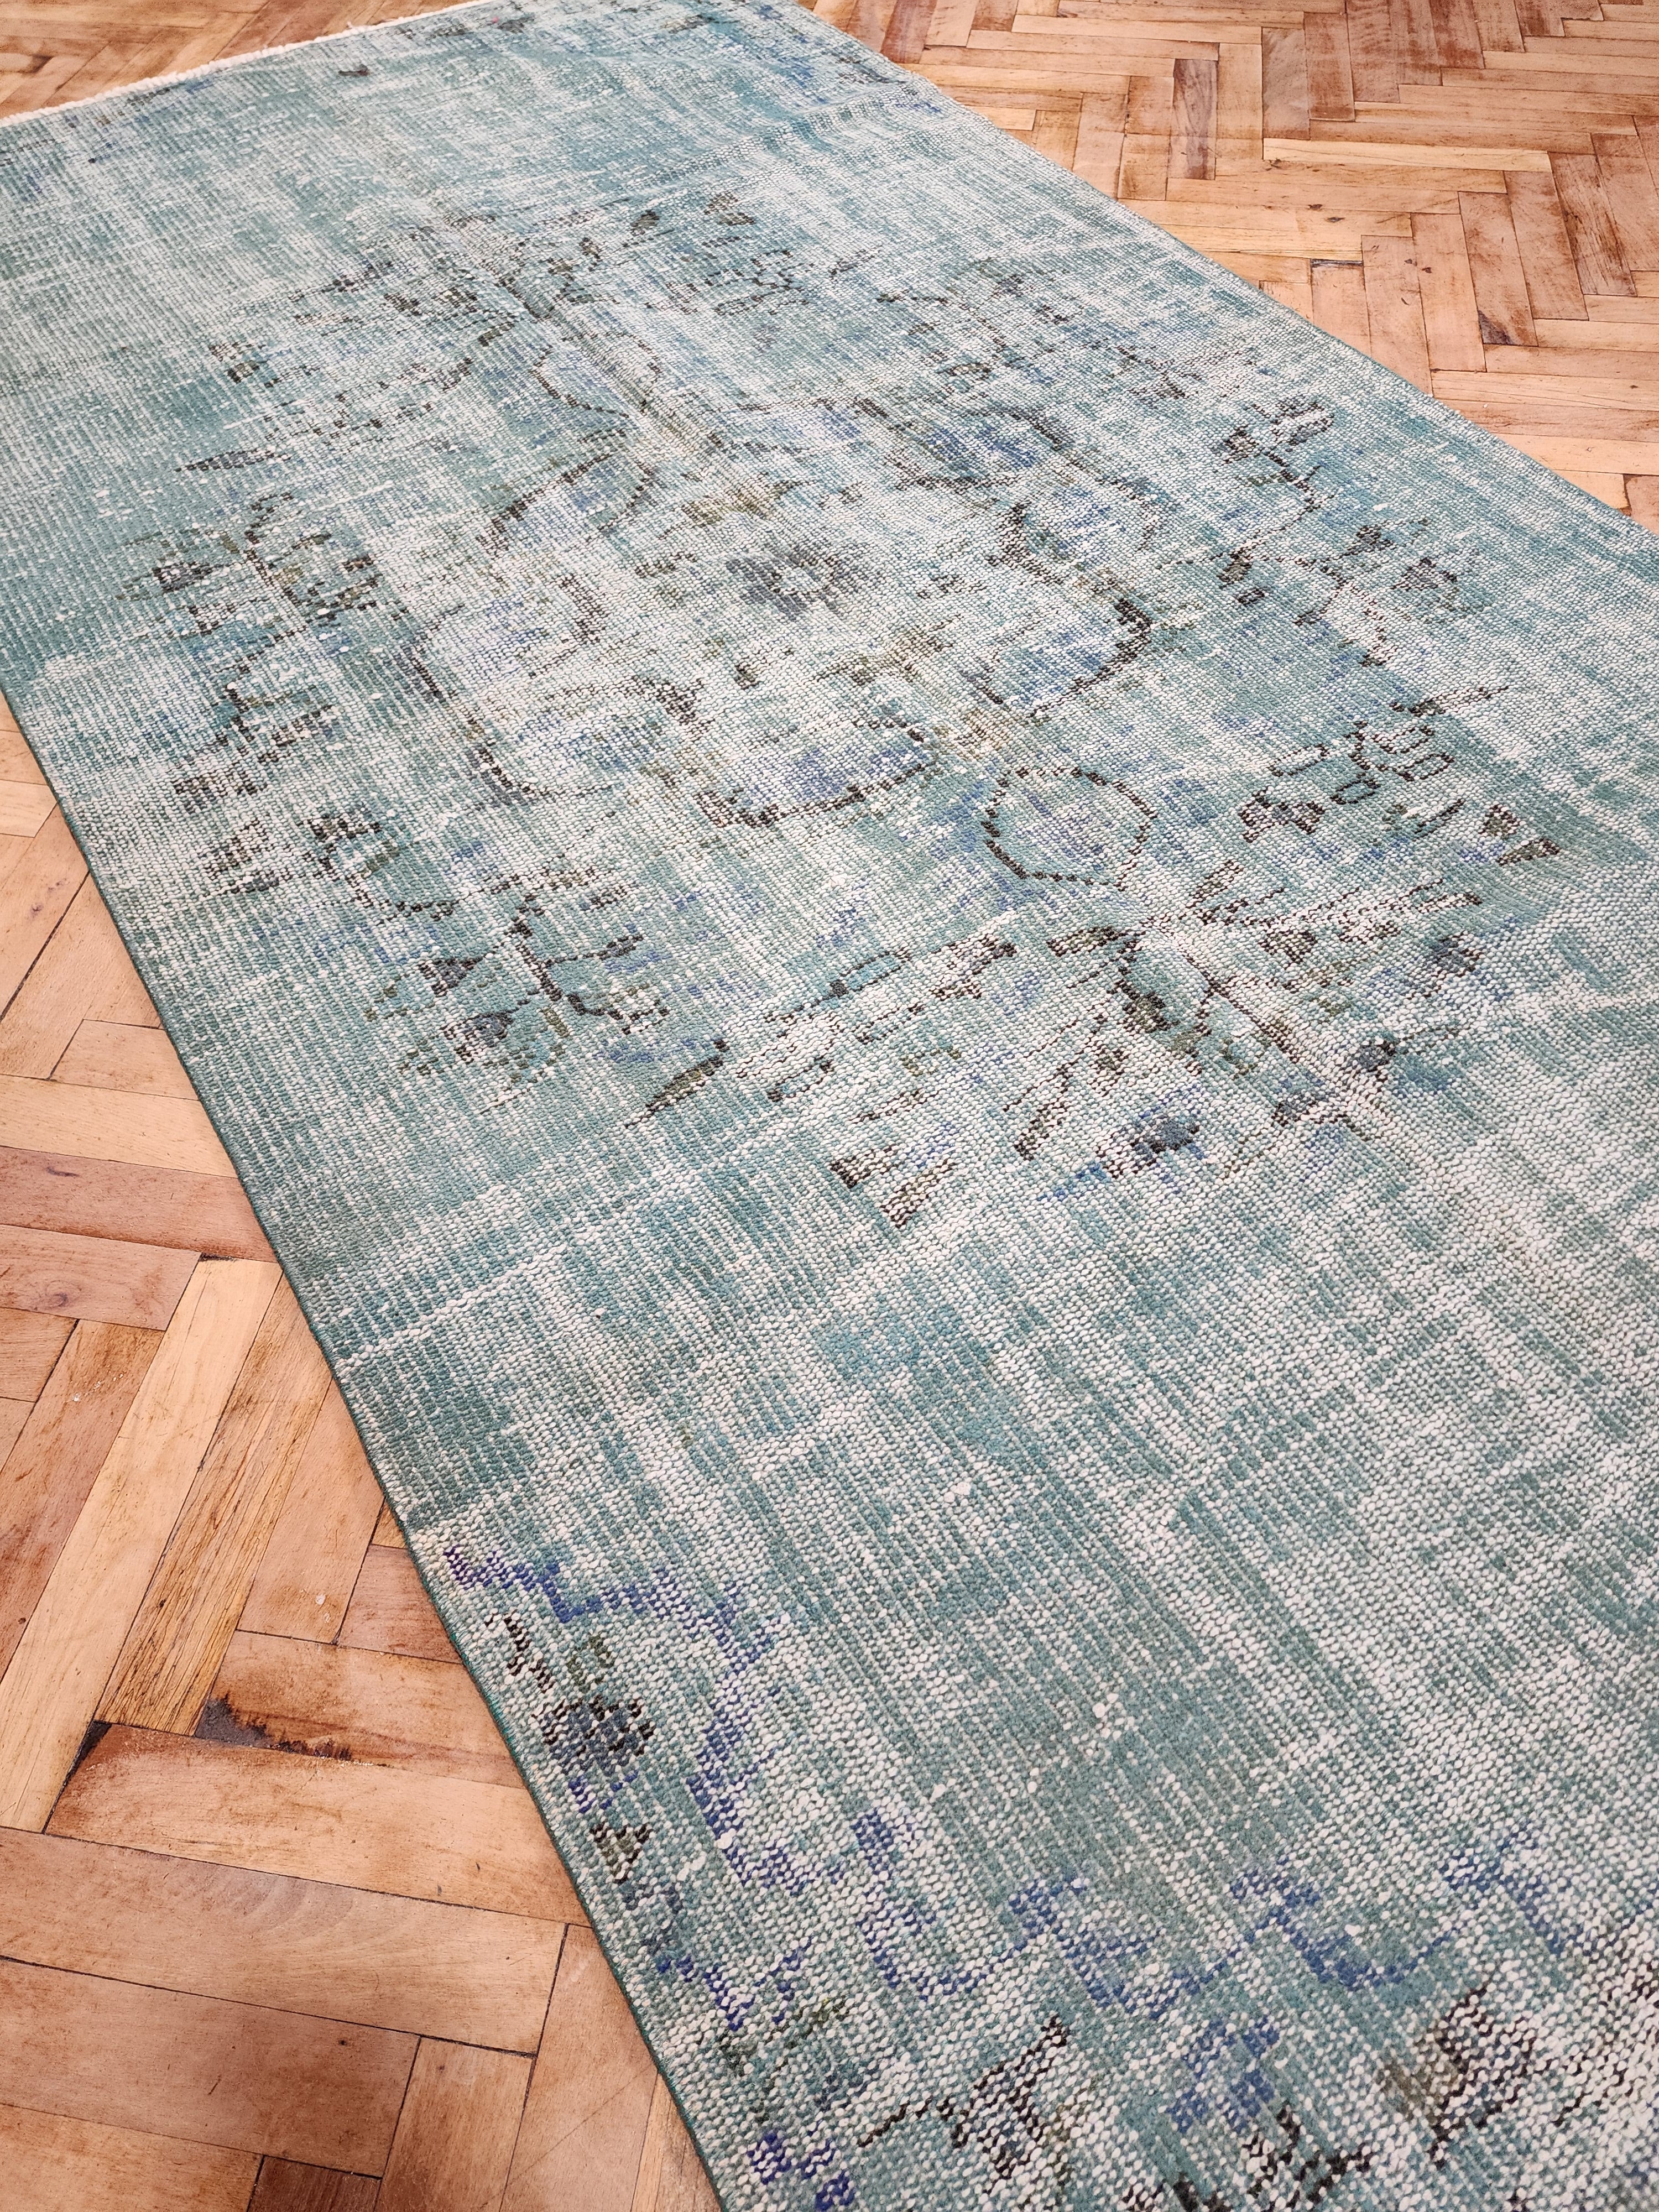 Overdyed Vintage Rug, Pale Turquoise Blue Recycled Rug, Handmade Wool Bohemian Oriental Design Distressed Rug, Persian Area Rug, 7'6"x3'9"